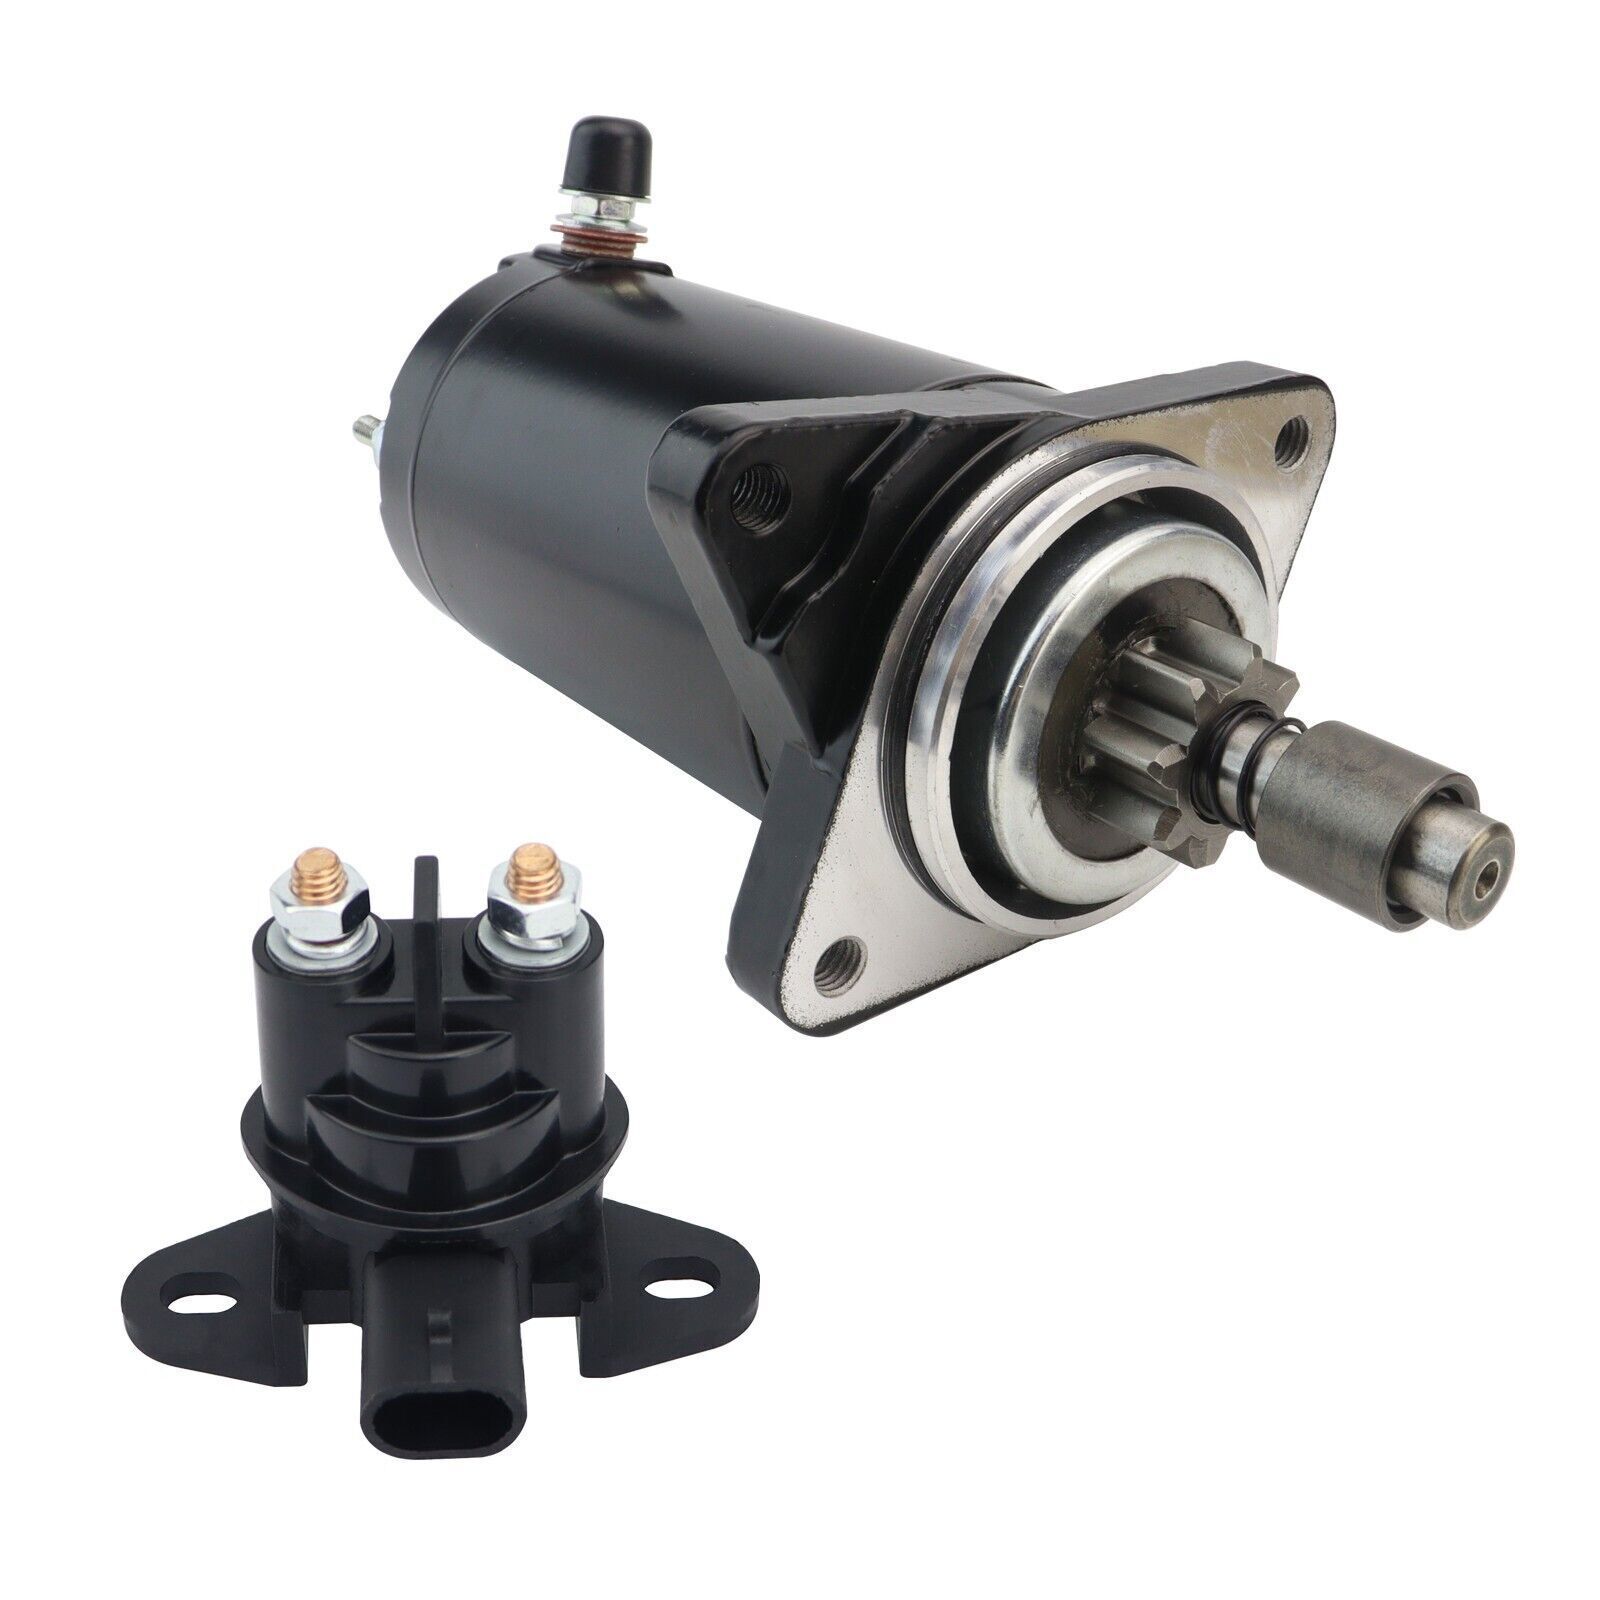 18531 Starter Motor Replacement for Sea-Doo GTI LE RFI 3D RFI 2003-2005 & Relay